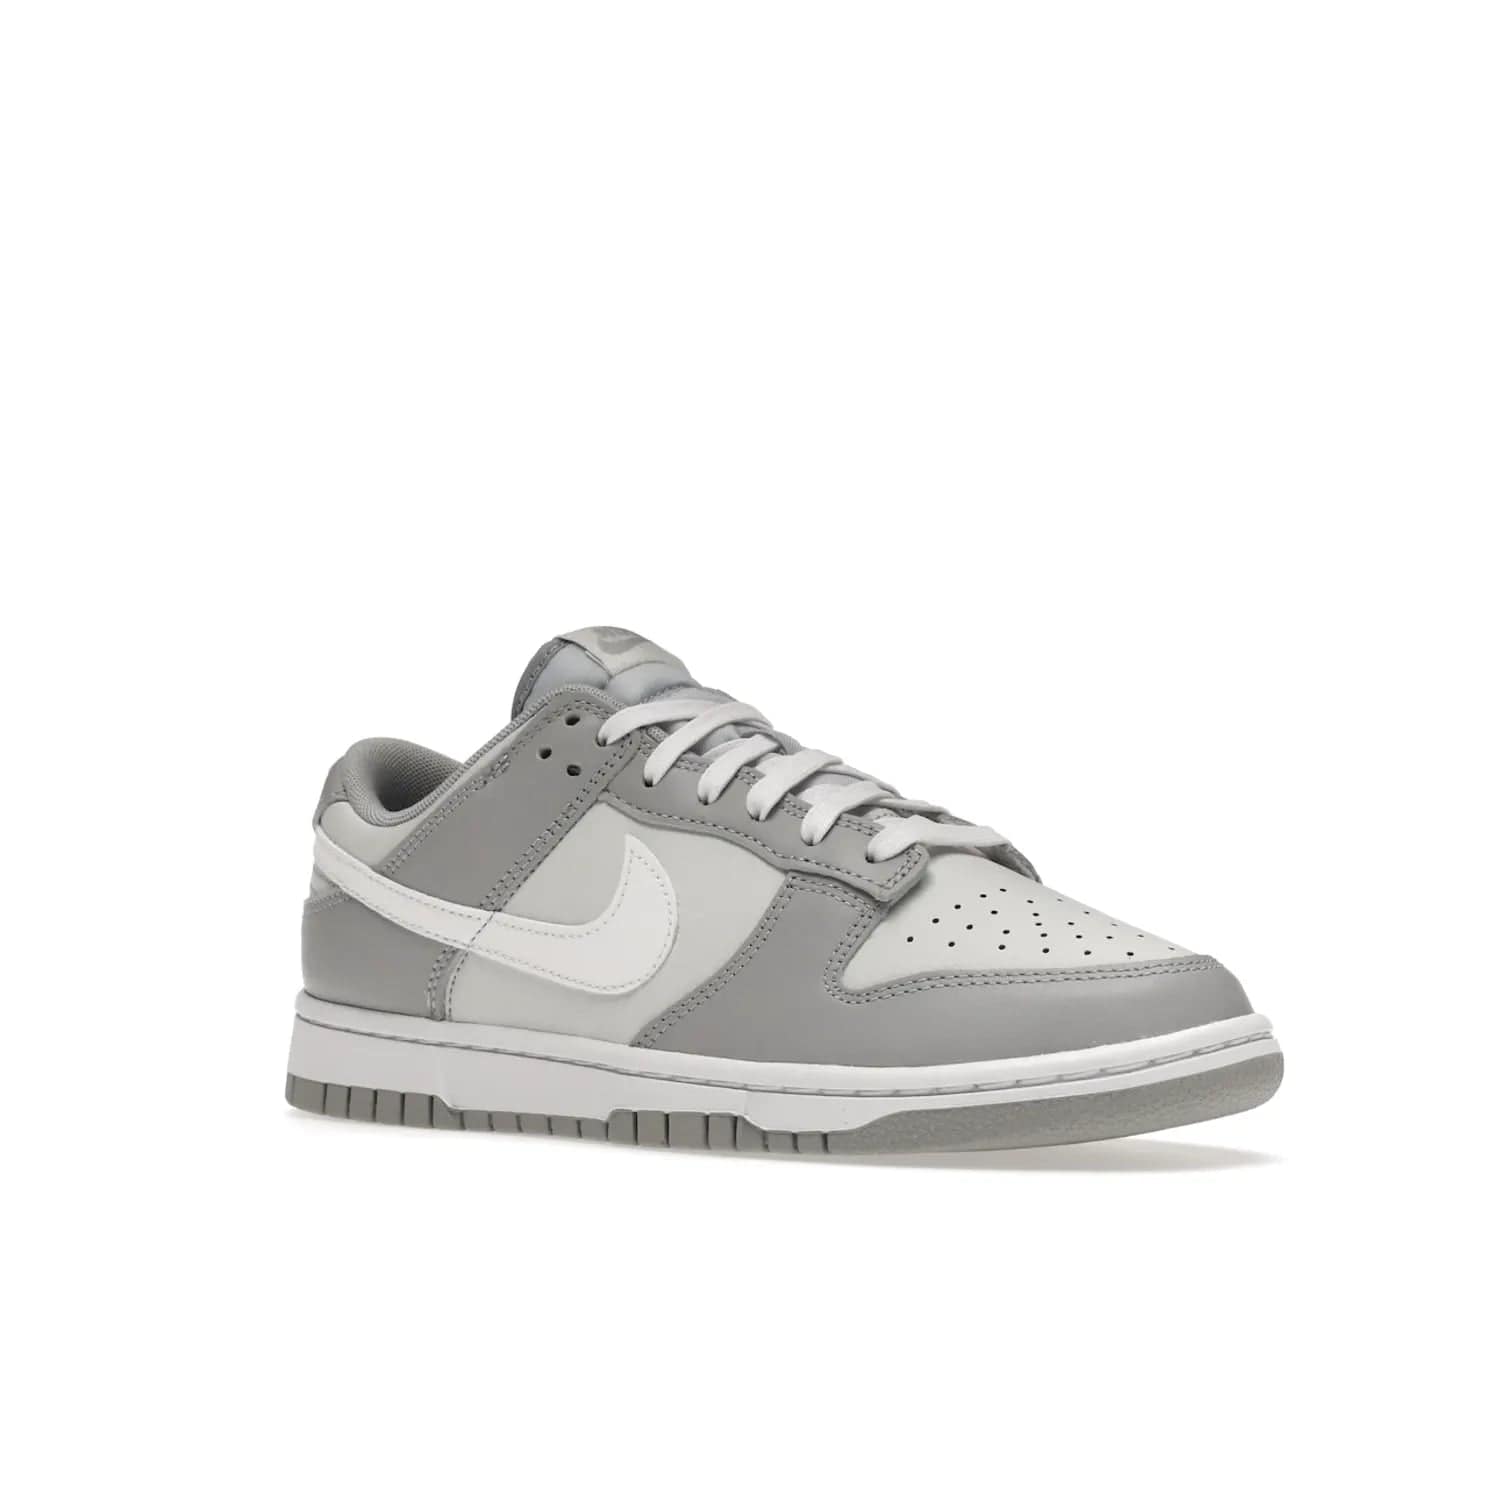 Nike Dunk Low Two Tone Grey - Image 5 - Only at www.BallersClubKickz.com - Fresh Nike Dunk Low Two Tone Grey leather/overlay Sneaker. White Swoosh detailing, nylon tongue, woven label and Air Sole. Get yours and stay on the trend.